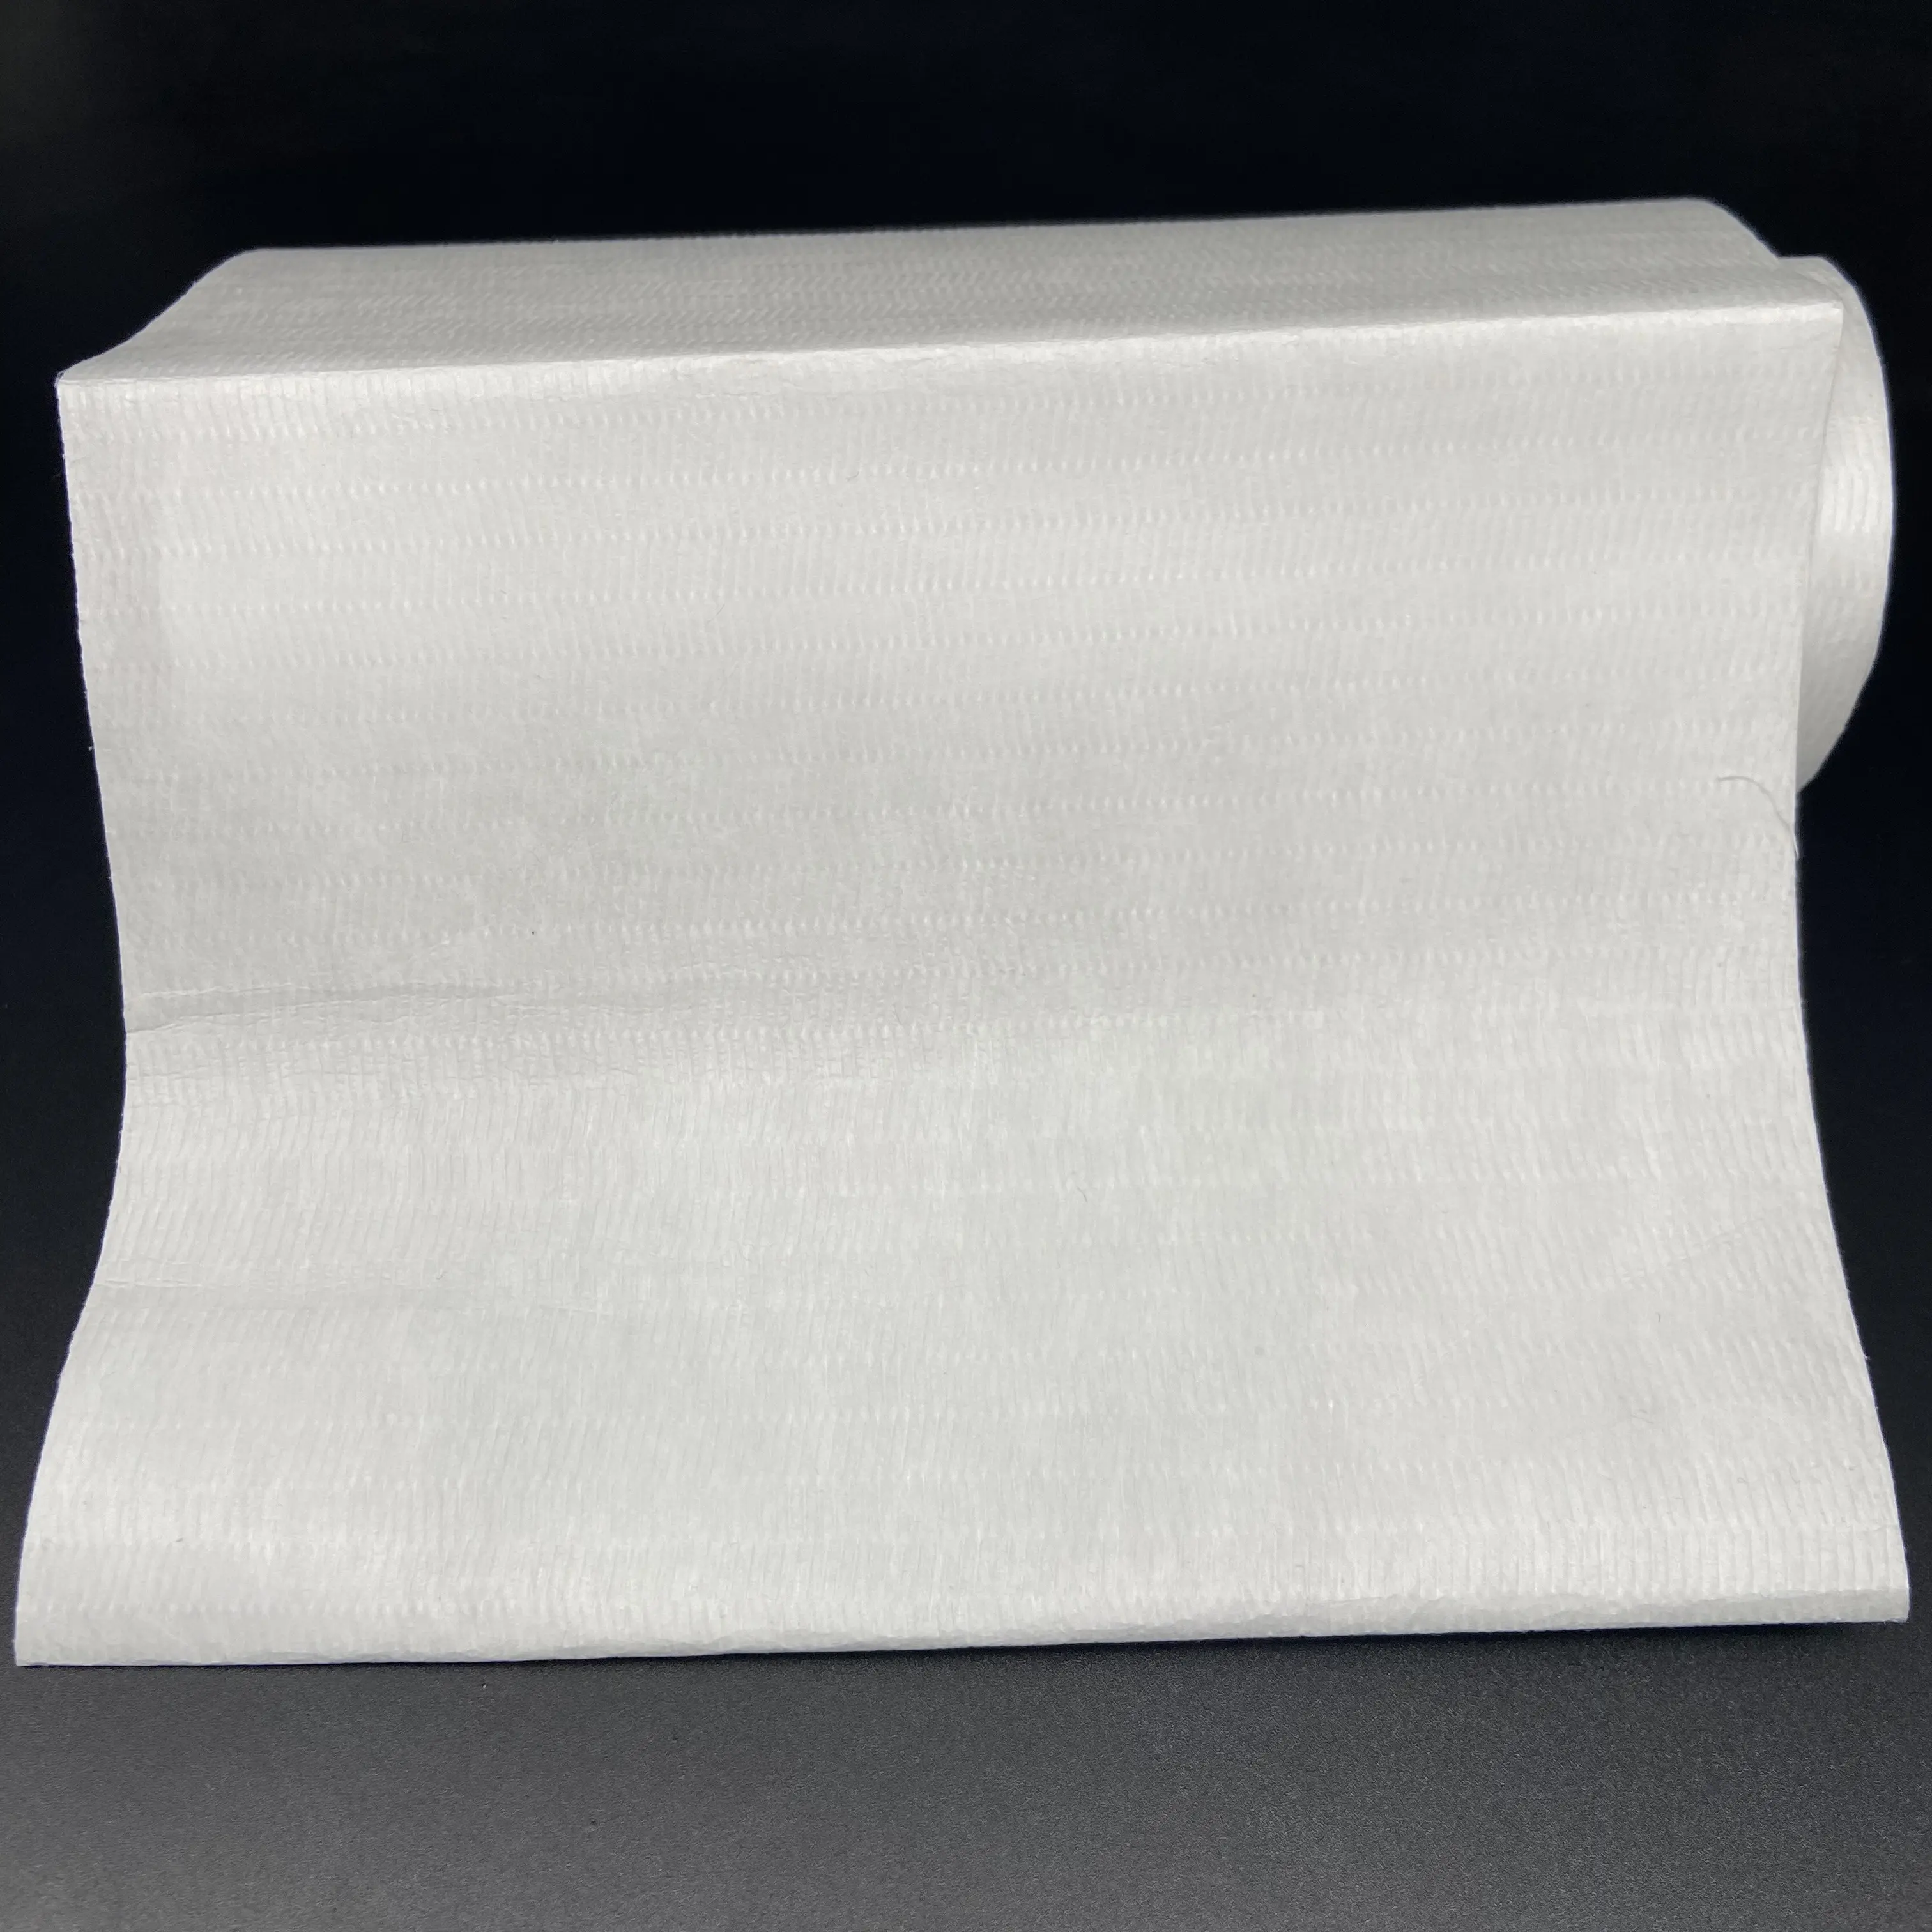 Polypropylene Filter Meltblown Nonwoven Fabric Rolls For Protective Material Can Be Customized